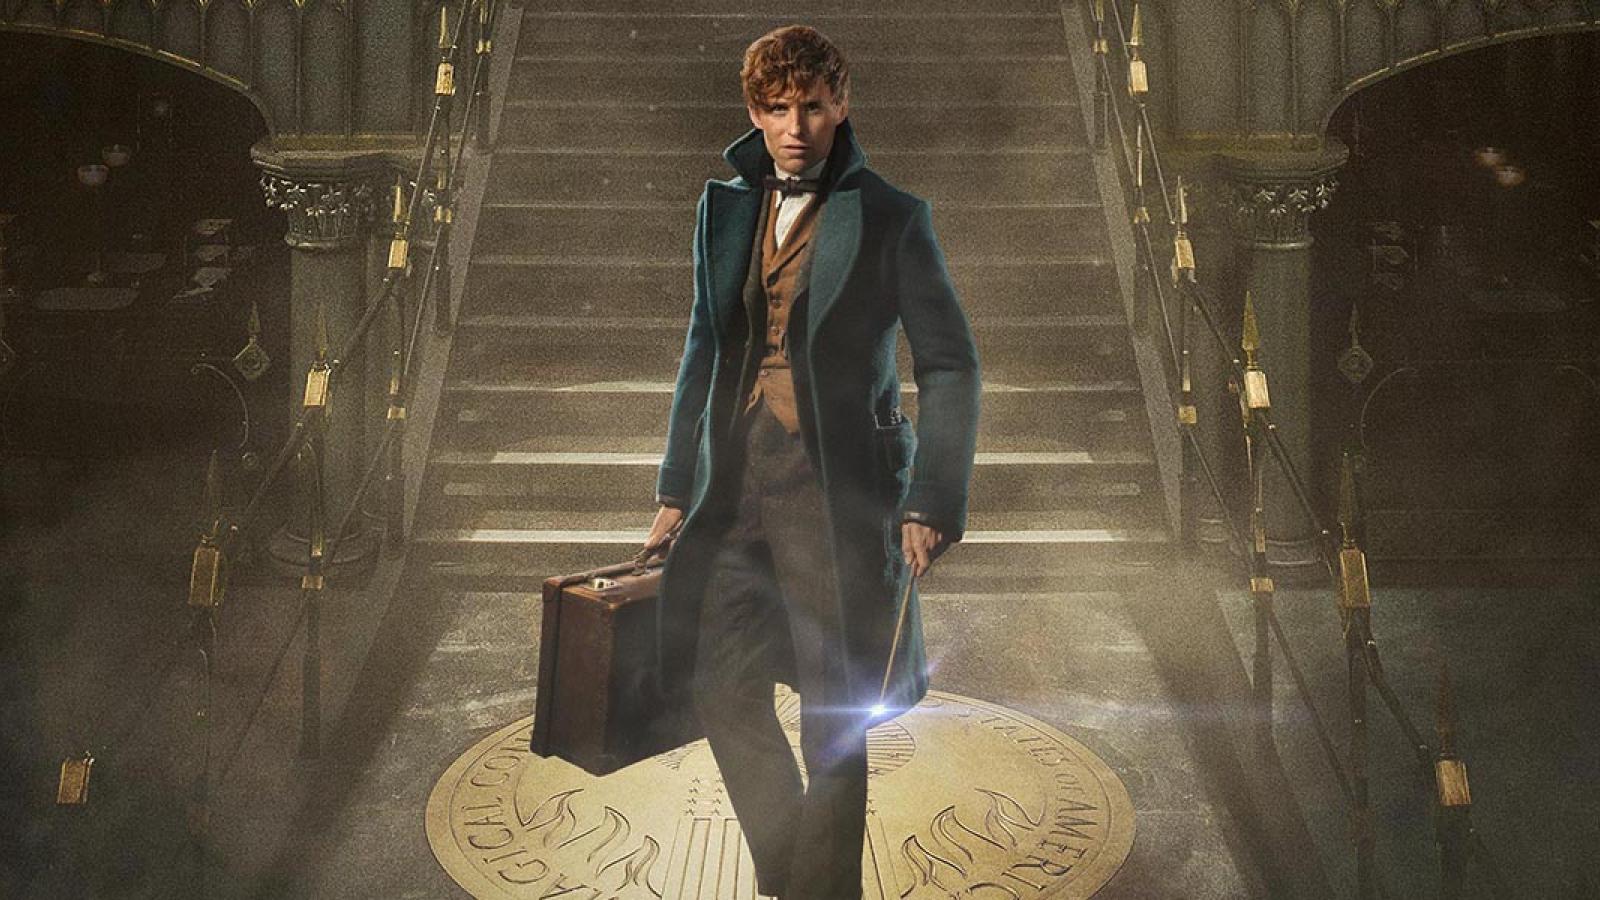 Fantastic Beasts and Where to Find Them Promotional Image